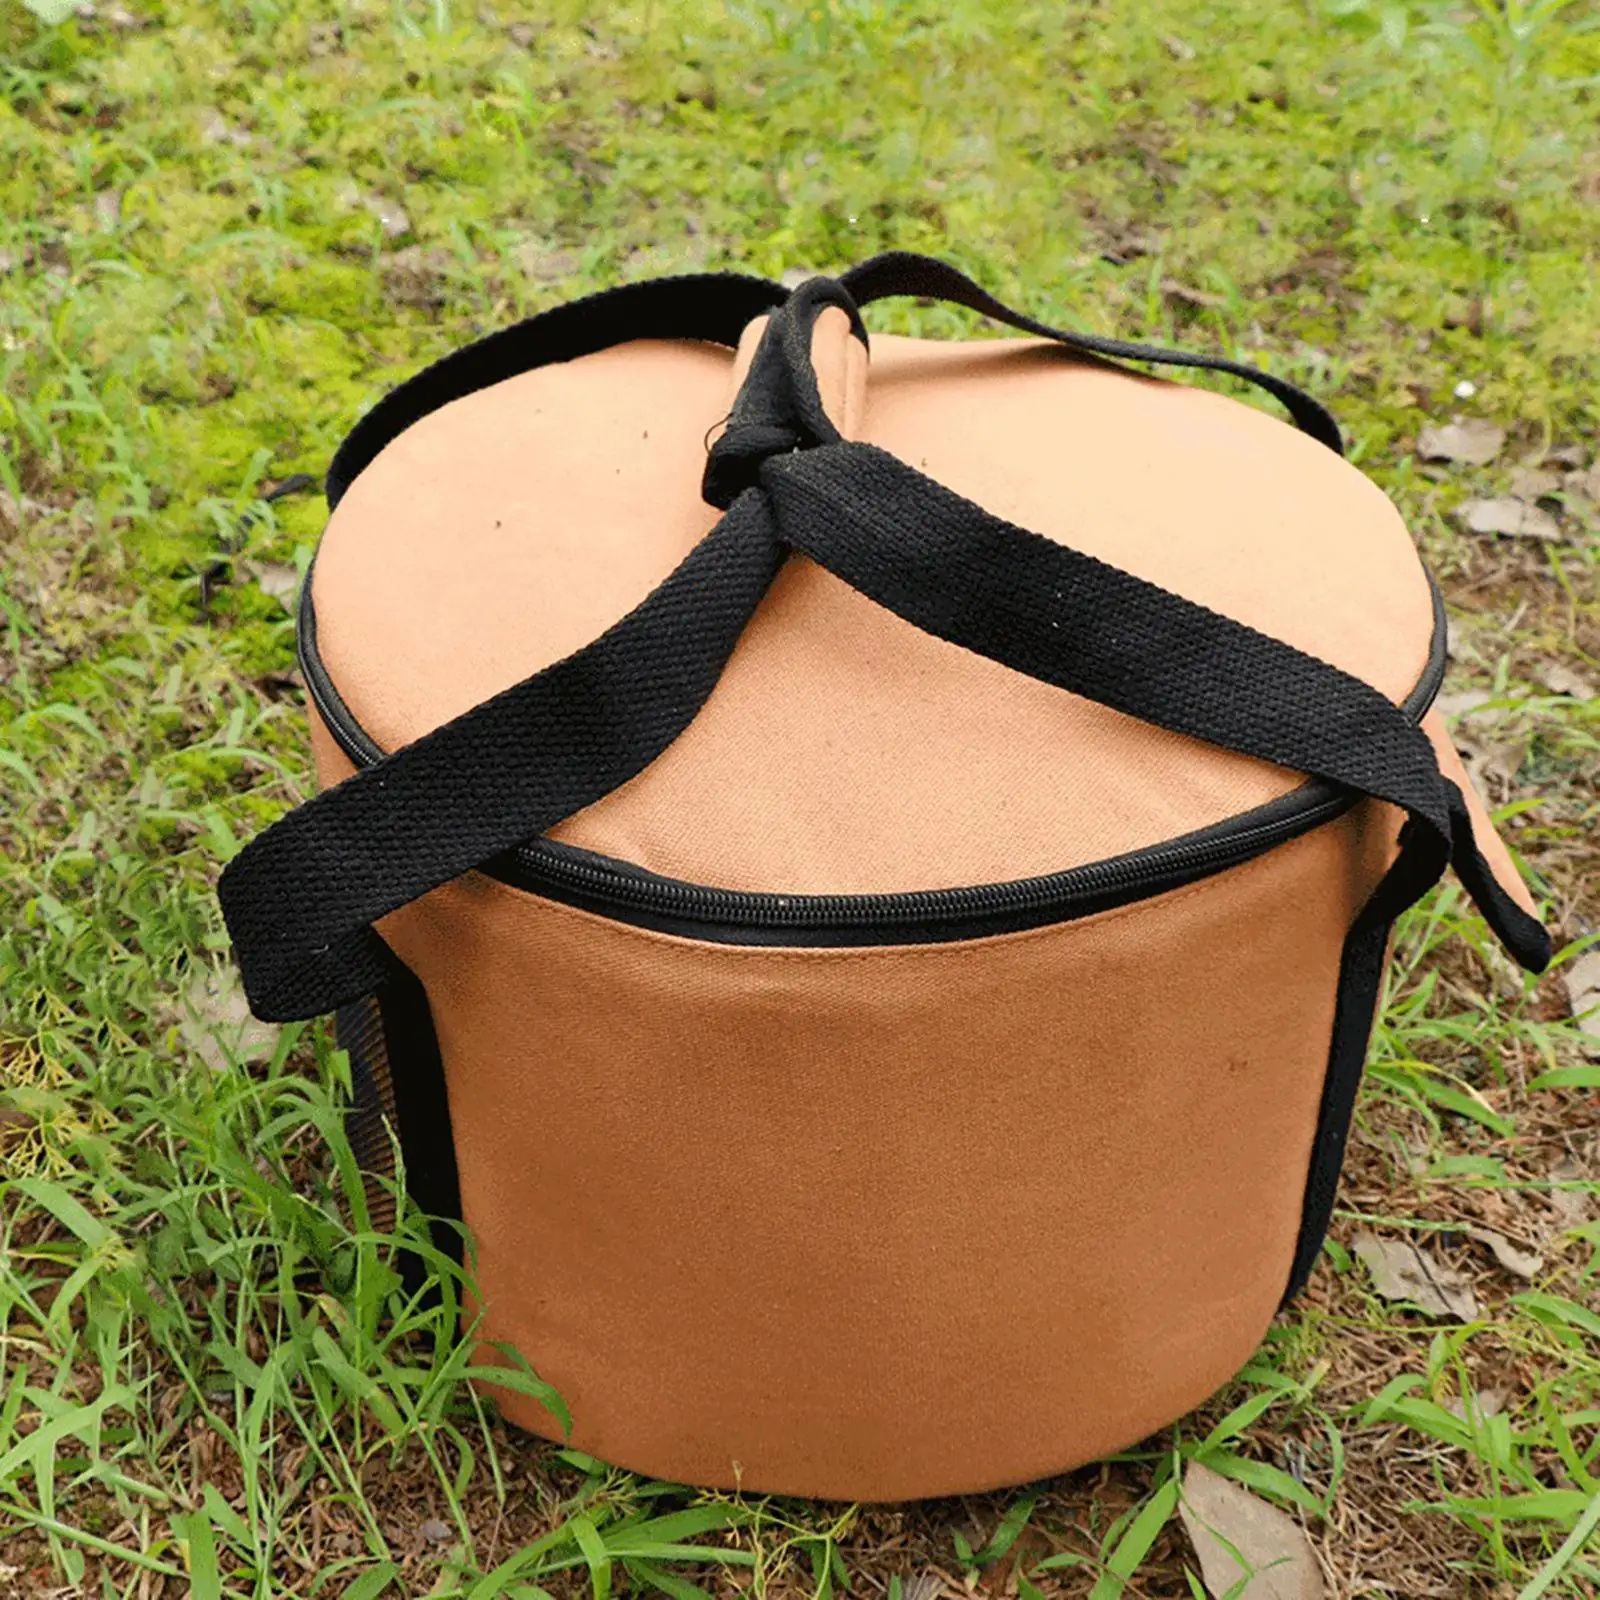 Camping Cookware Storage Bag Outdoor Equipment Carry Bag BBQ Travel Bag